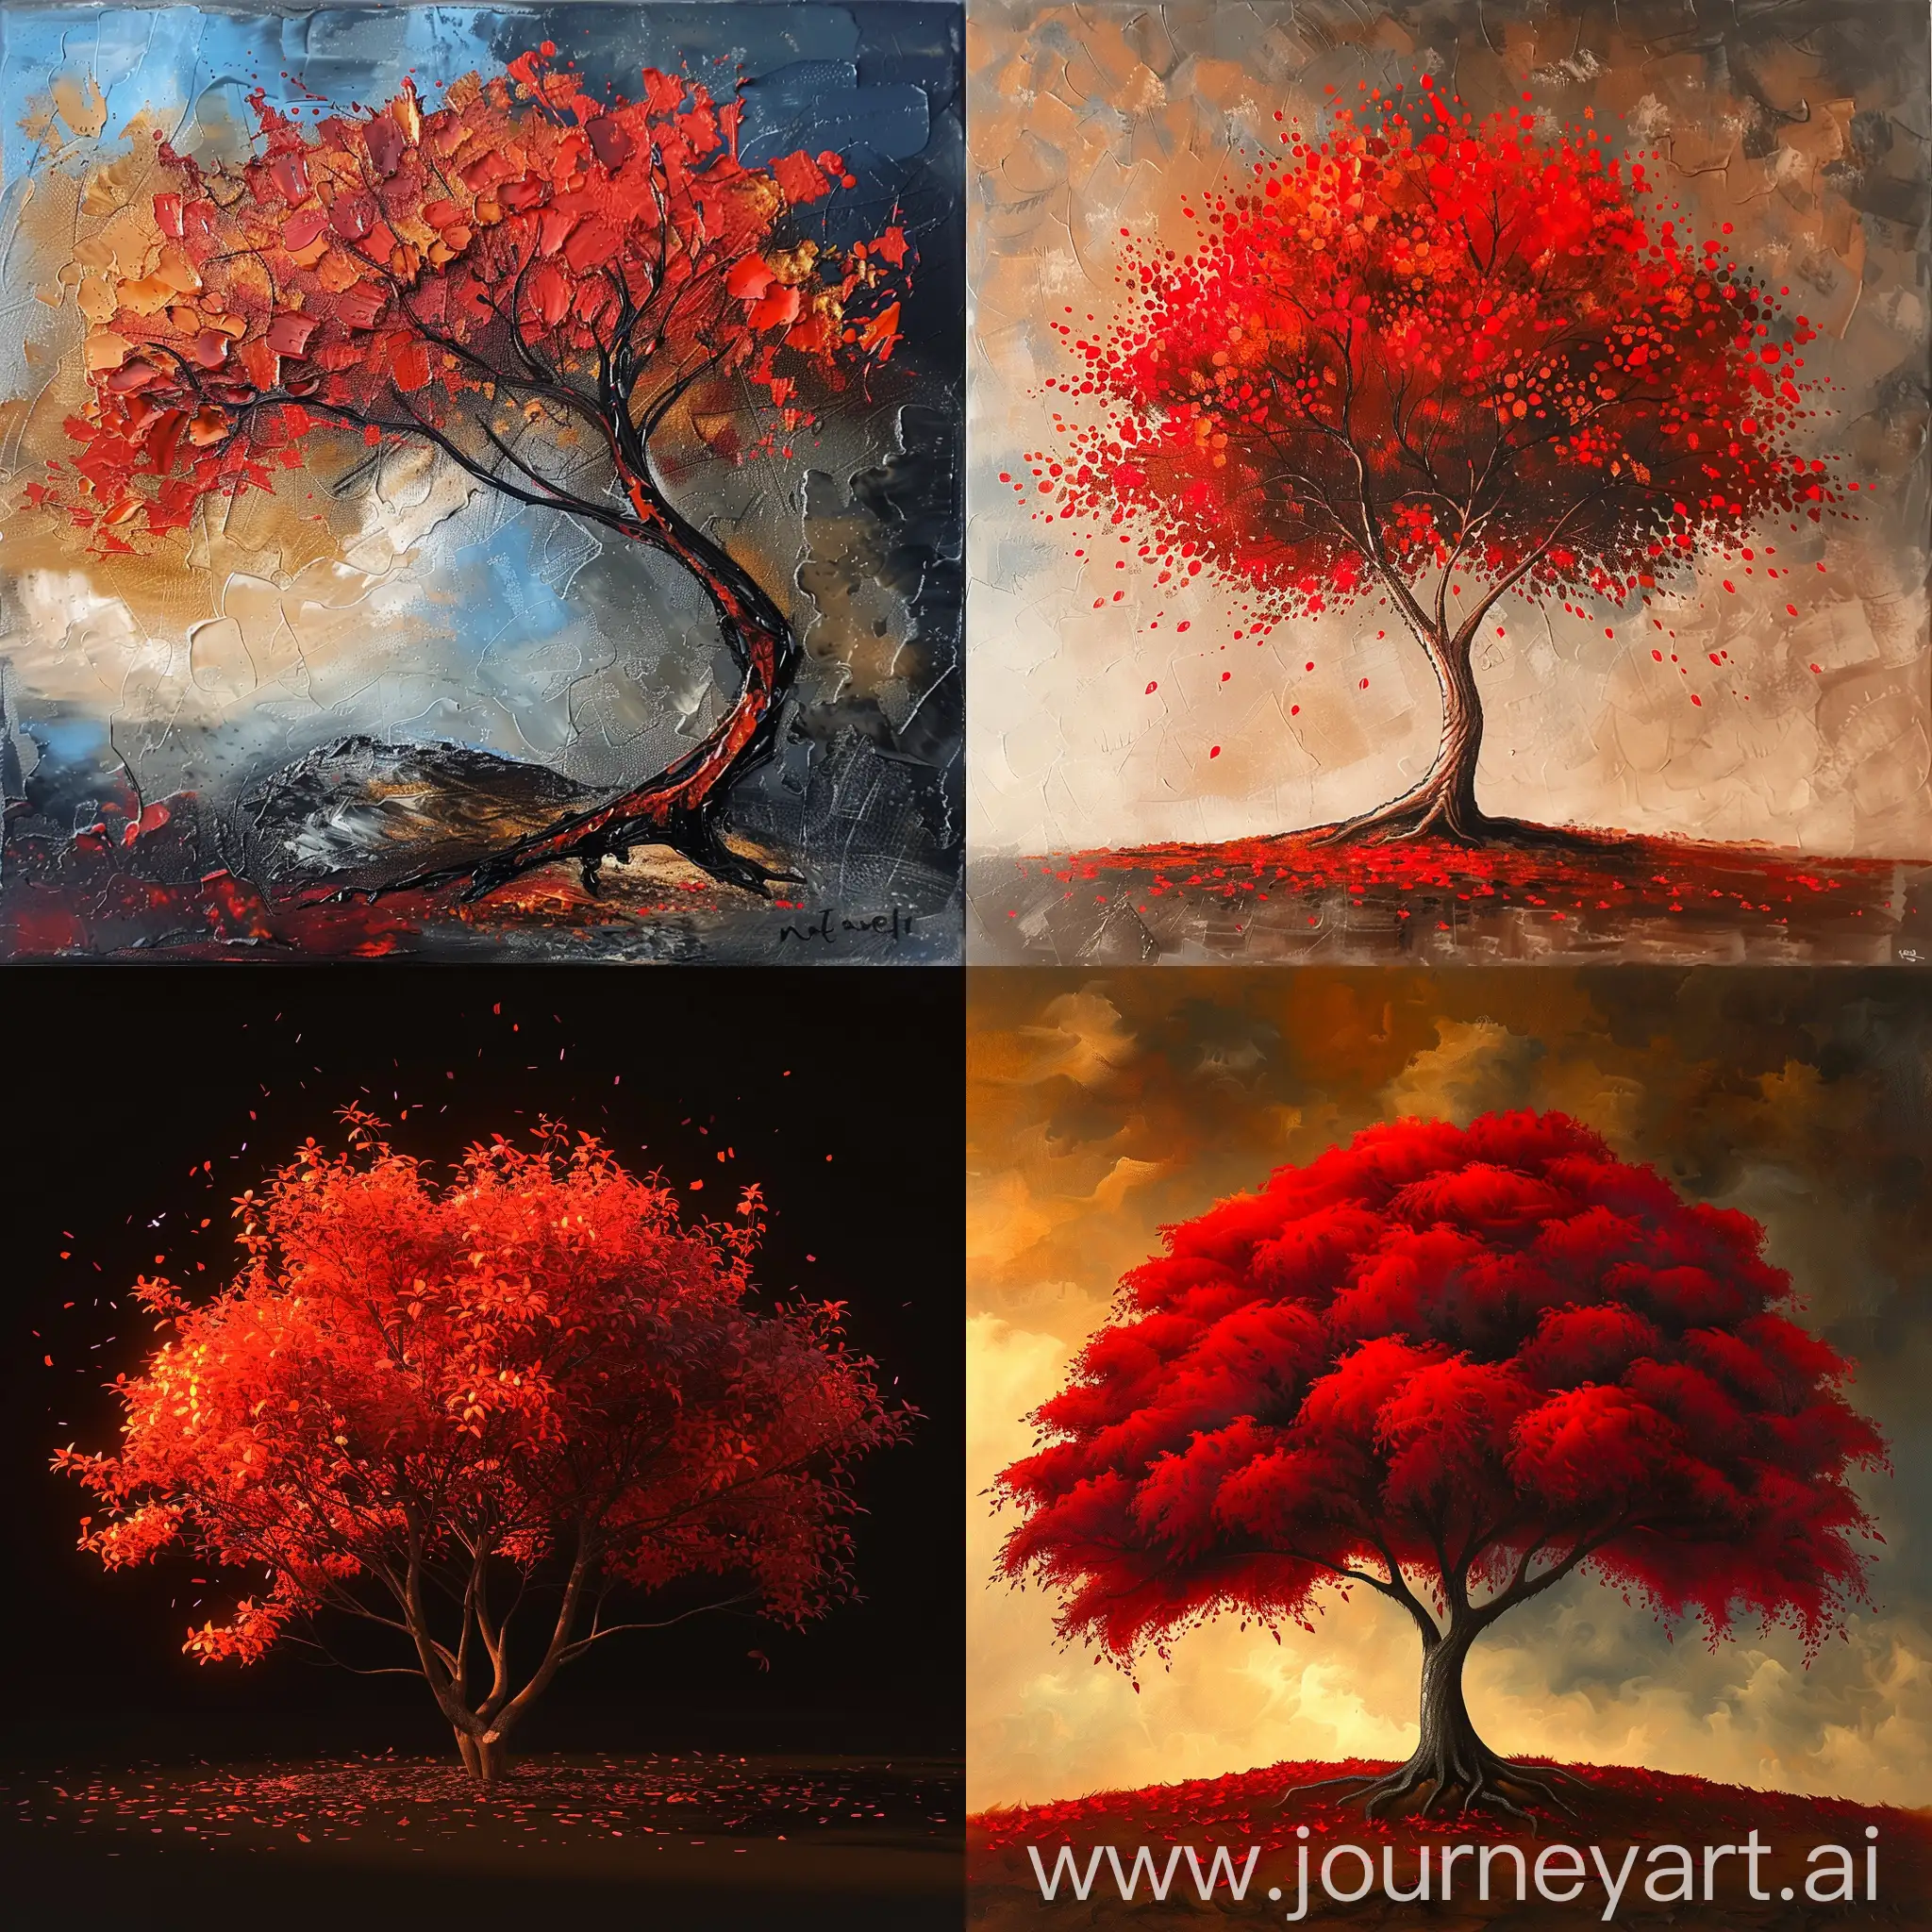 Vibrant-Red-Tree-with-Flaming-Leaves-in-Autumnal-Splendor